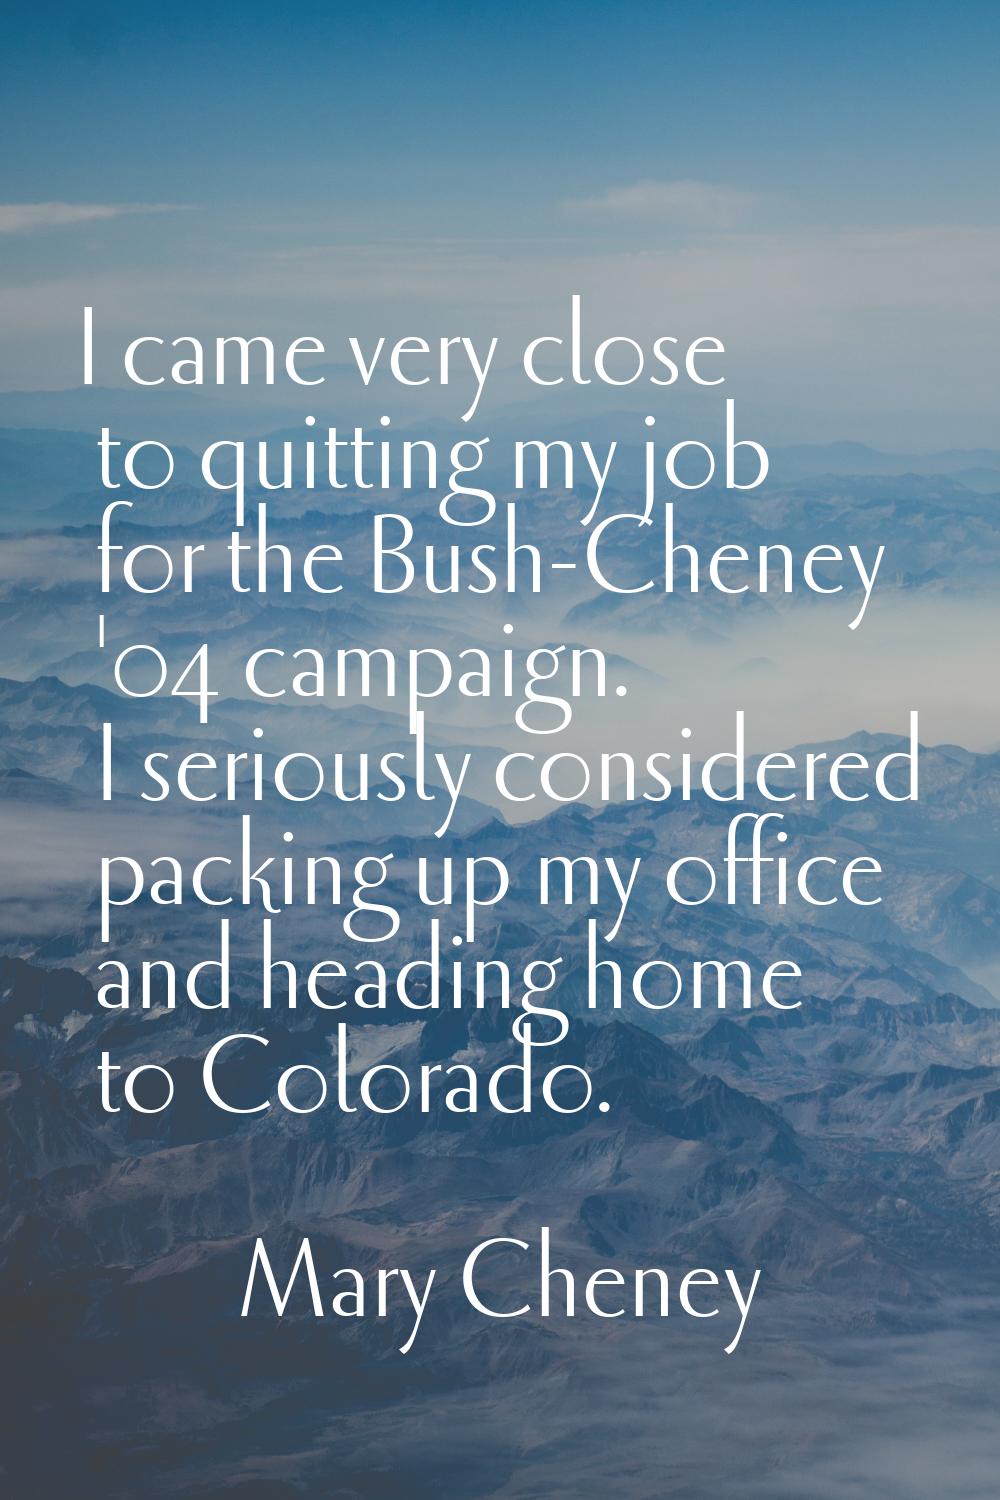 I came very close to quitting my job for the Bush-Cheney '04 campaign. I seriously considered packi